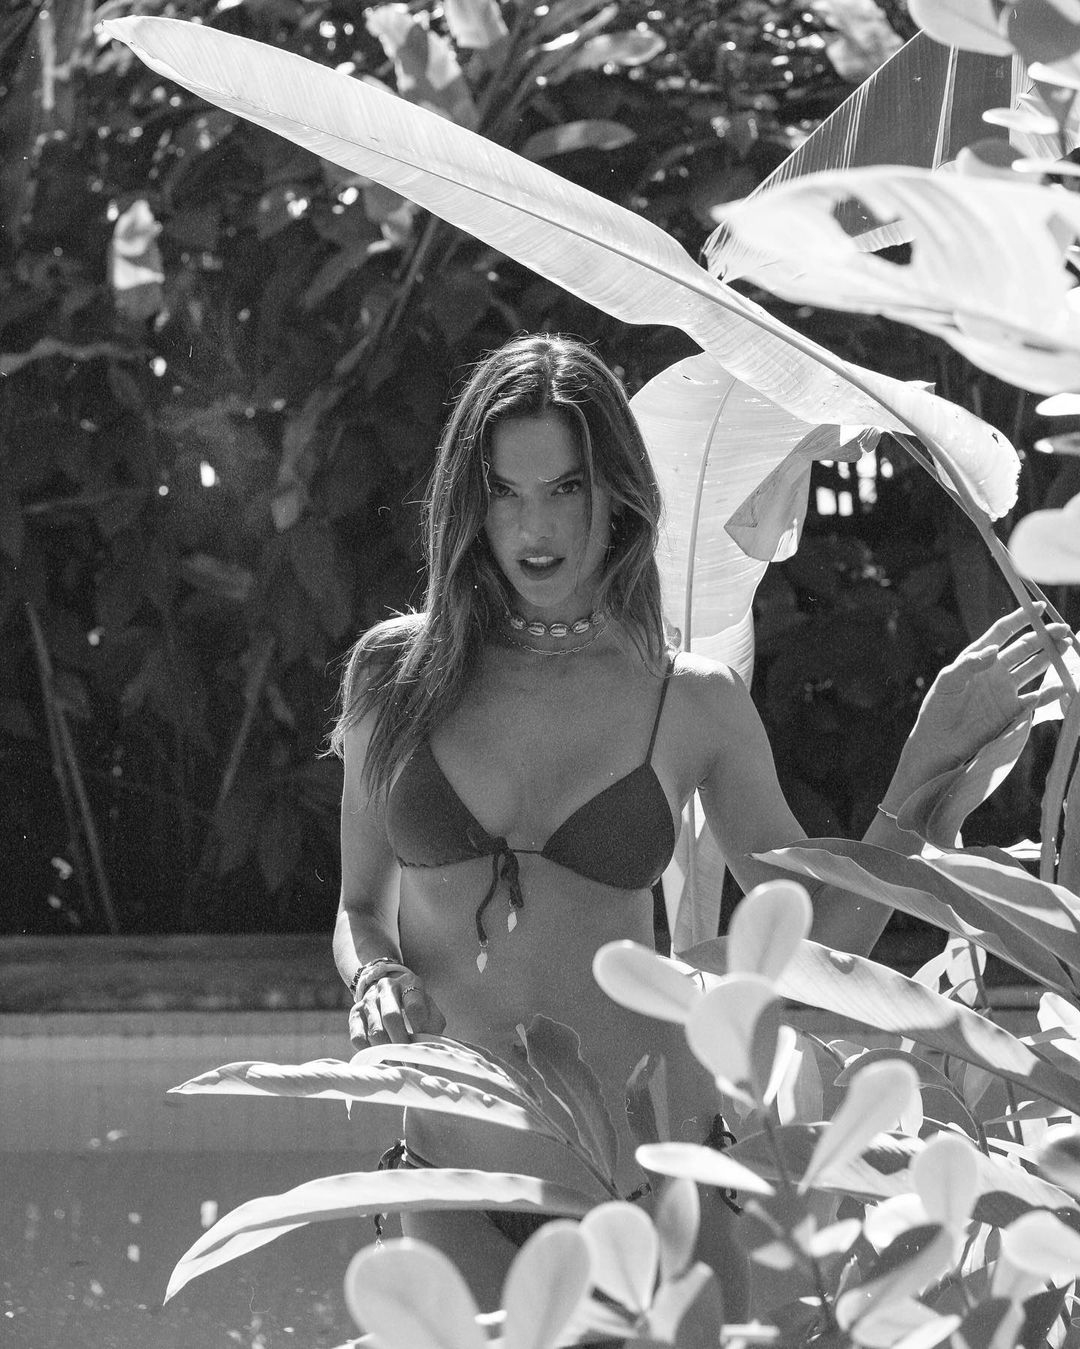 Alessandra Ambrosio Gets Sculpted! - Photo 29